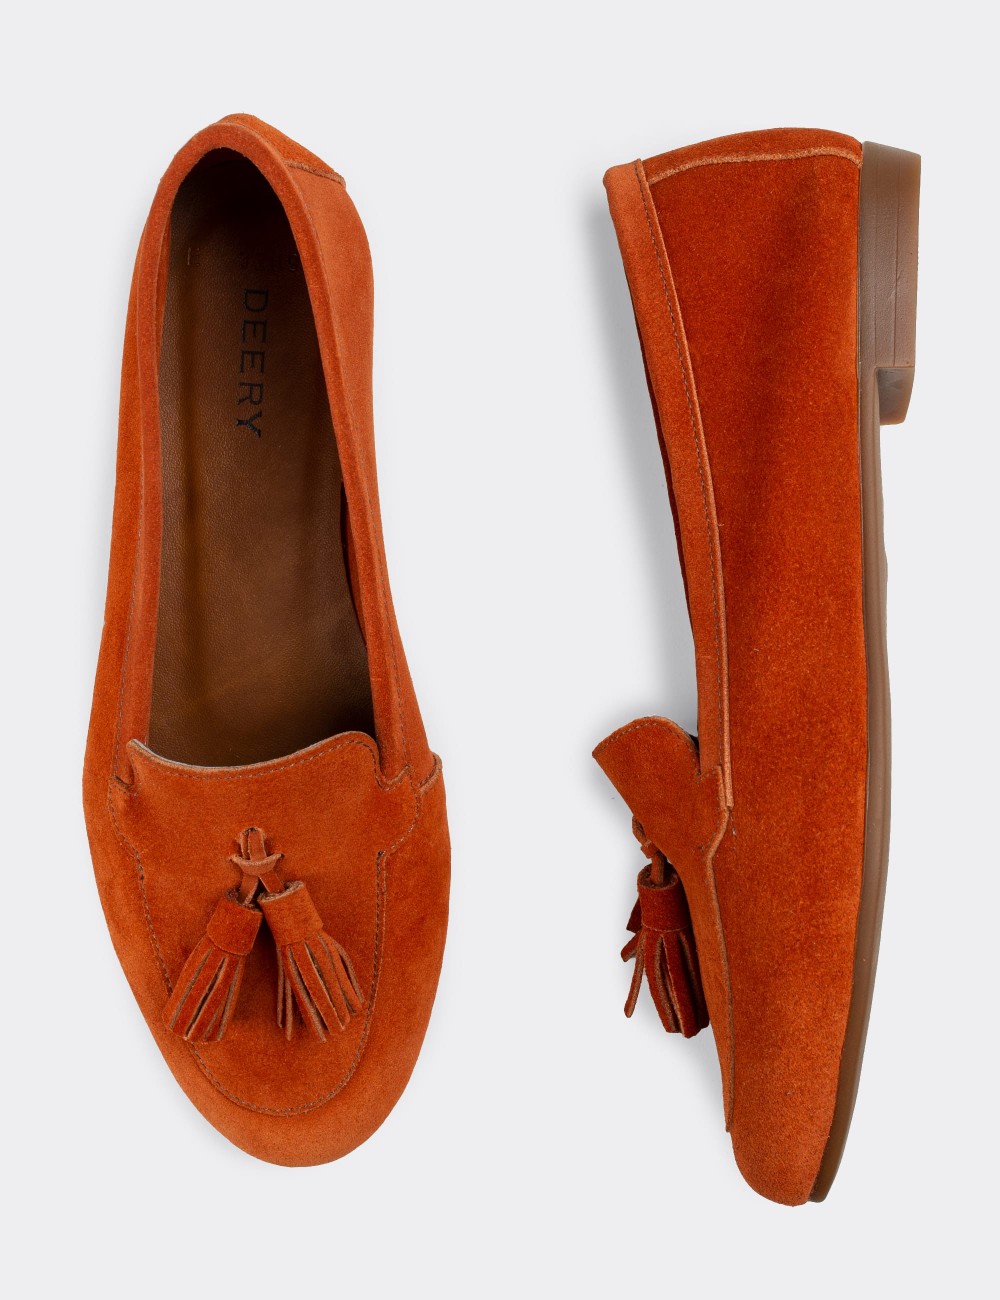 Orange Suede Leather Loafers - E3209ZTRCC01